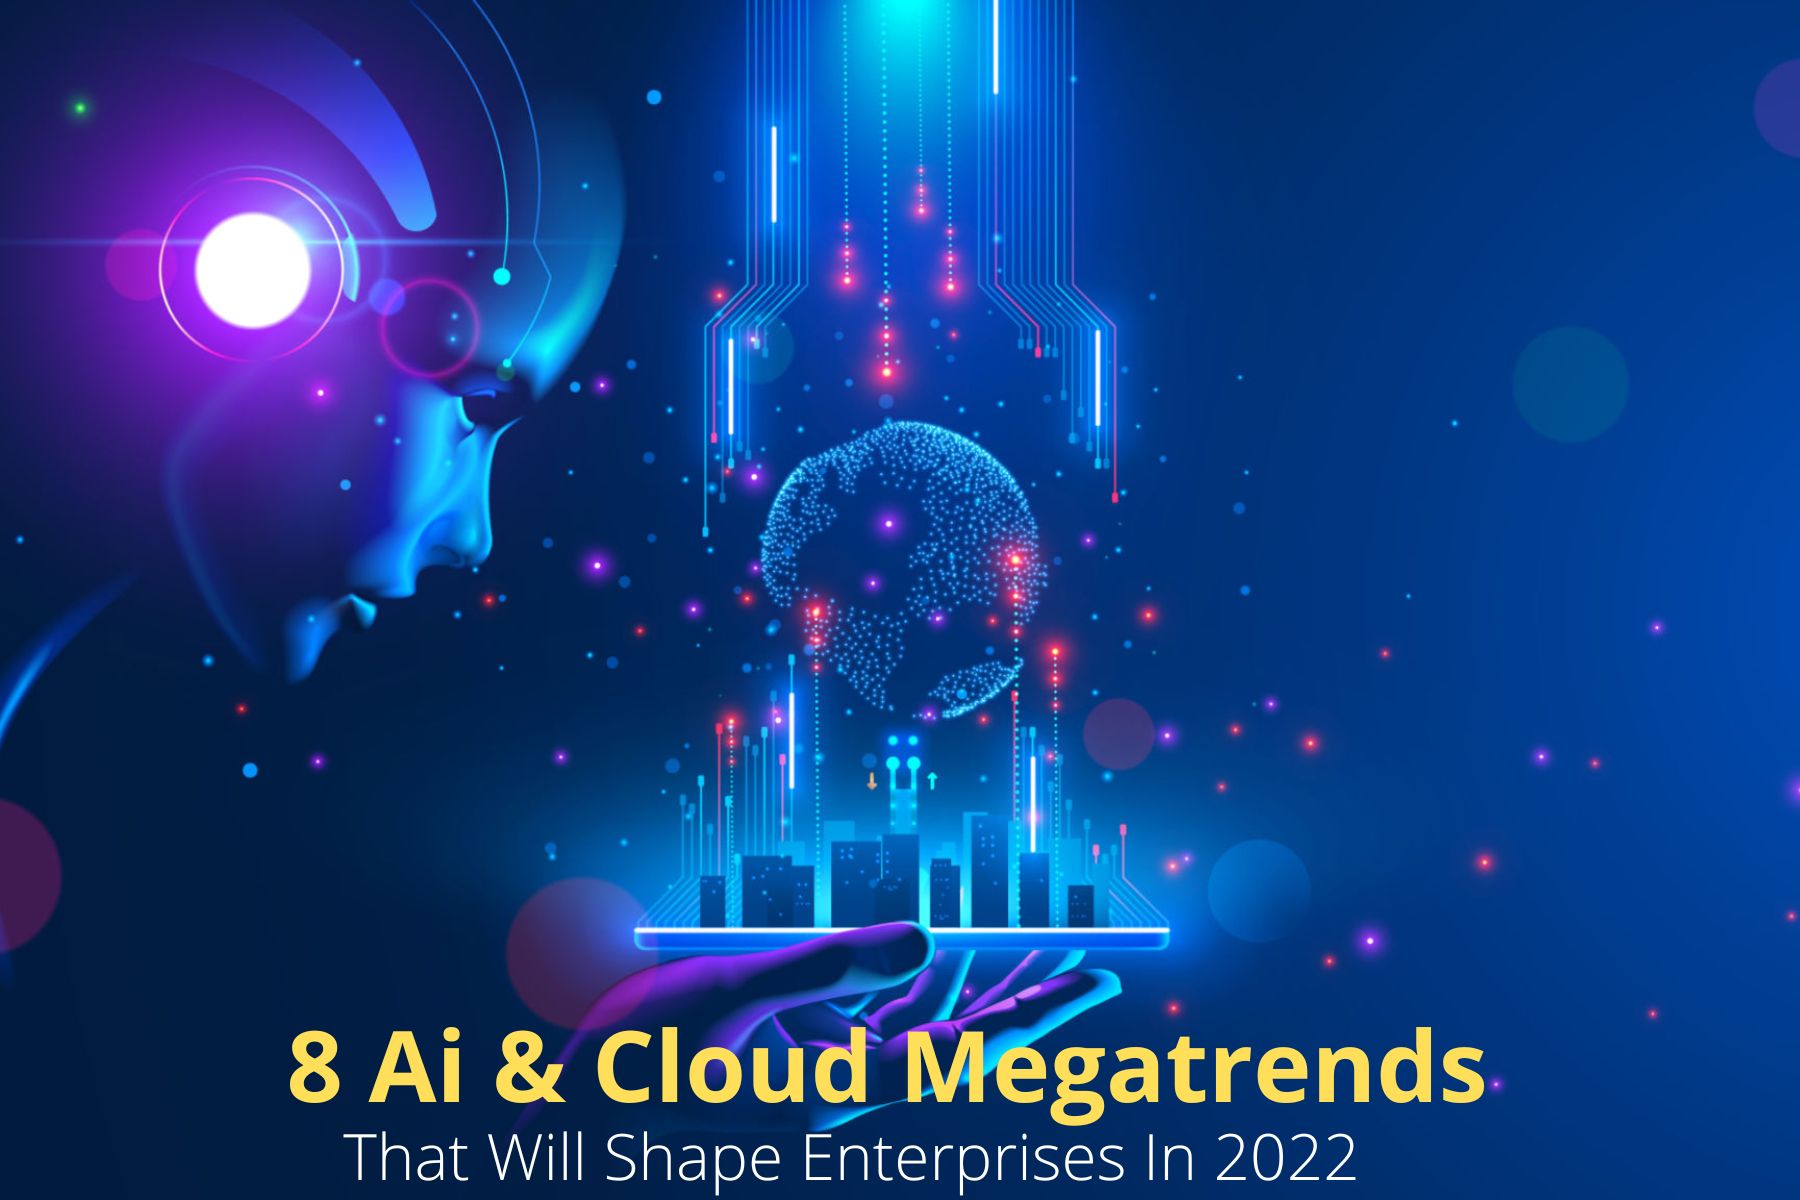 8Ai and Cloud Megatrends That Will Shape Enterprises In 2022